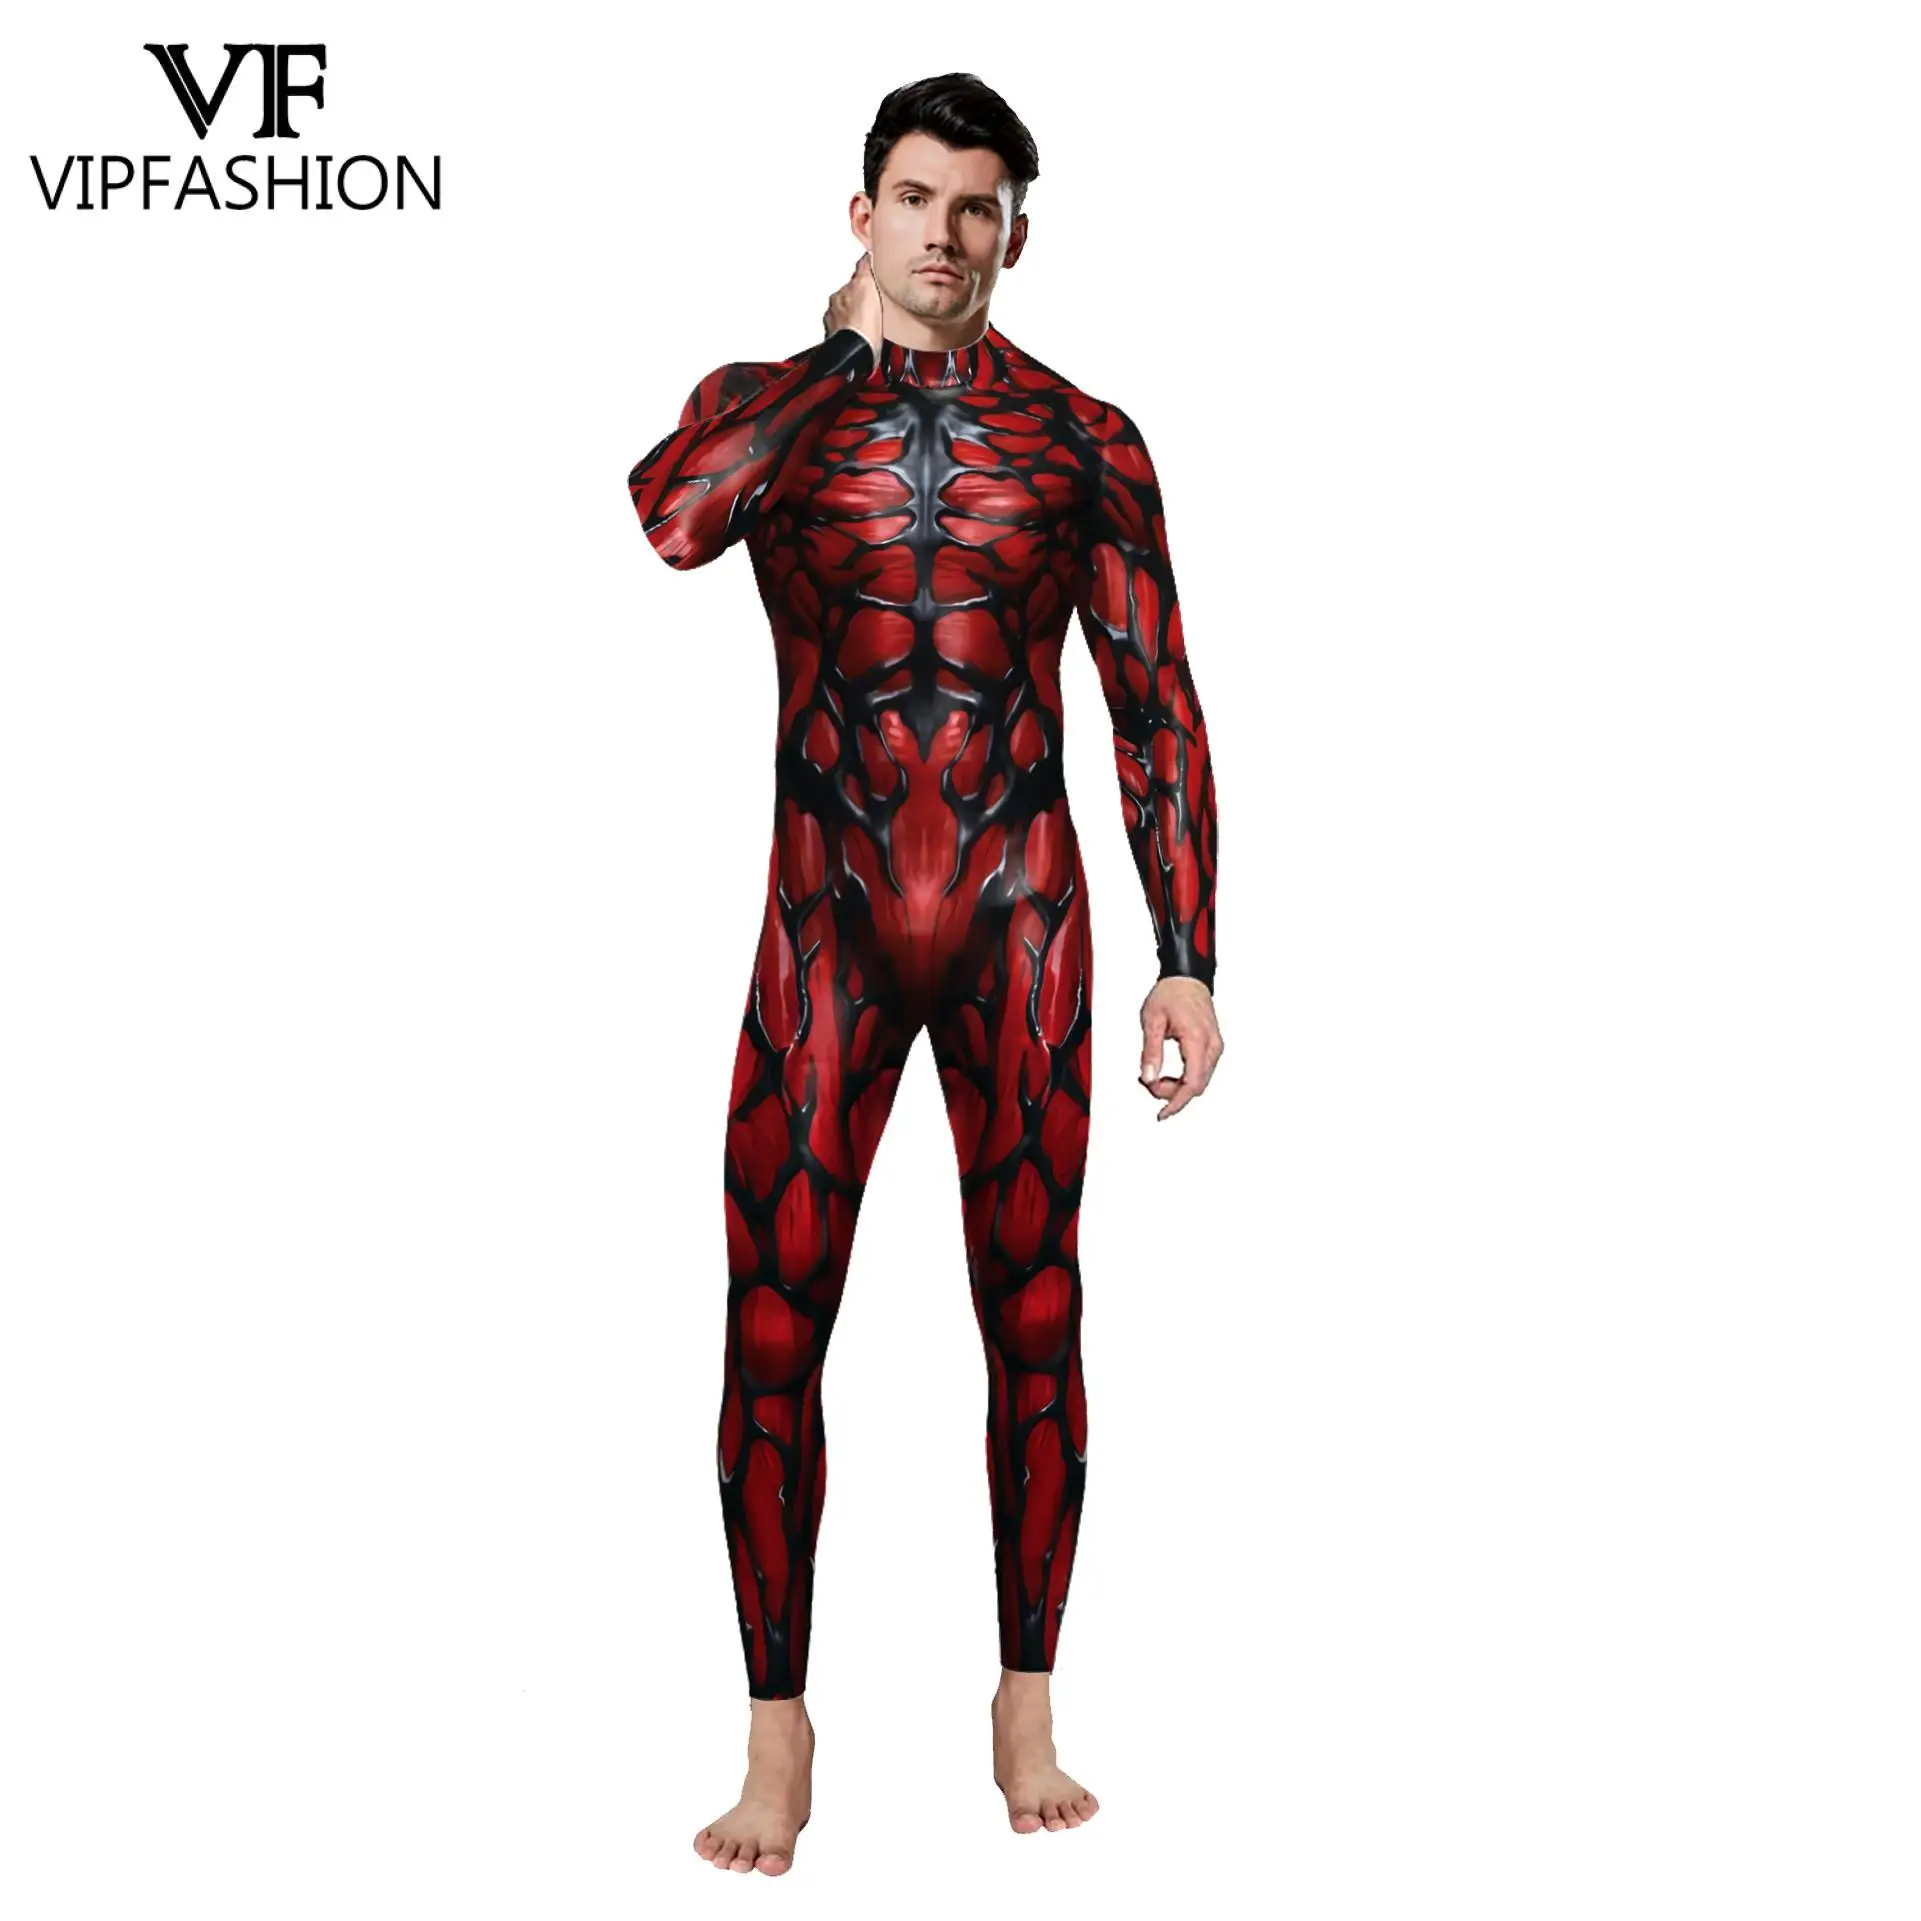 

VIP FASHION Halloween Spider Cosplay Costume for Adult Suit Fancy Carnival 3D Printing Bodysuit Zentai Spandex Jumpsuits